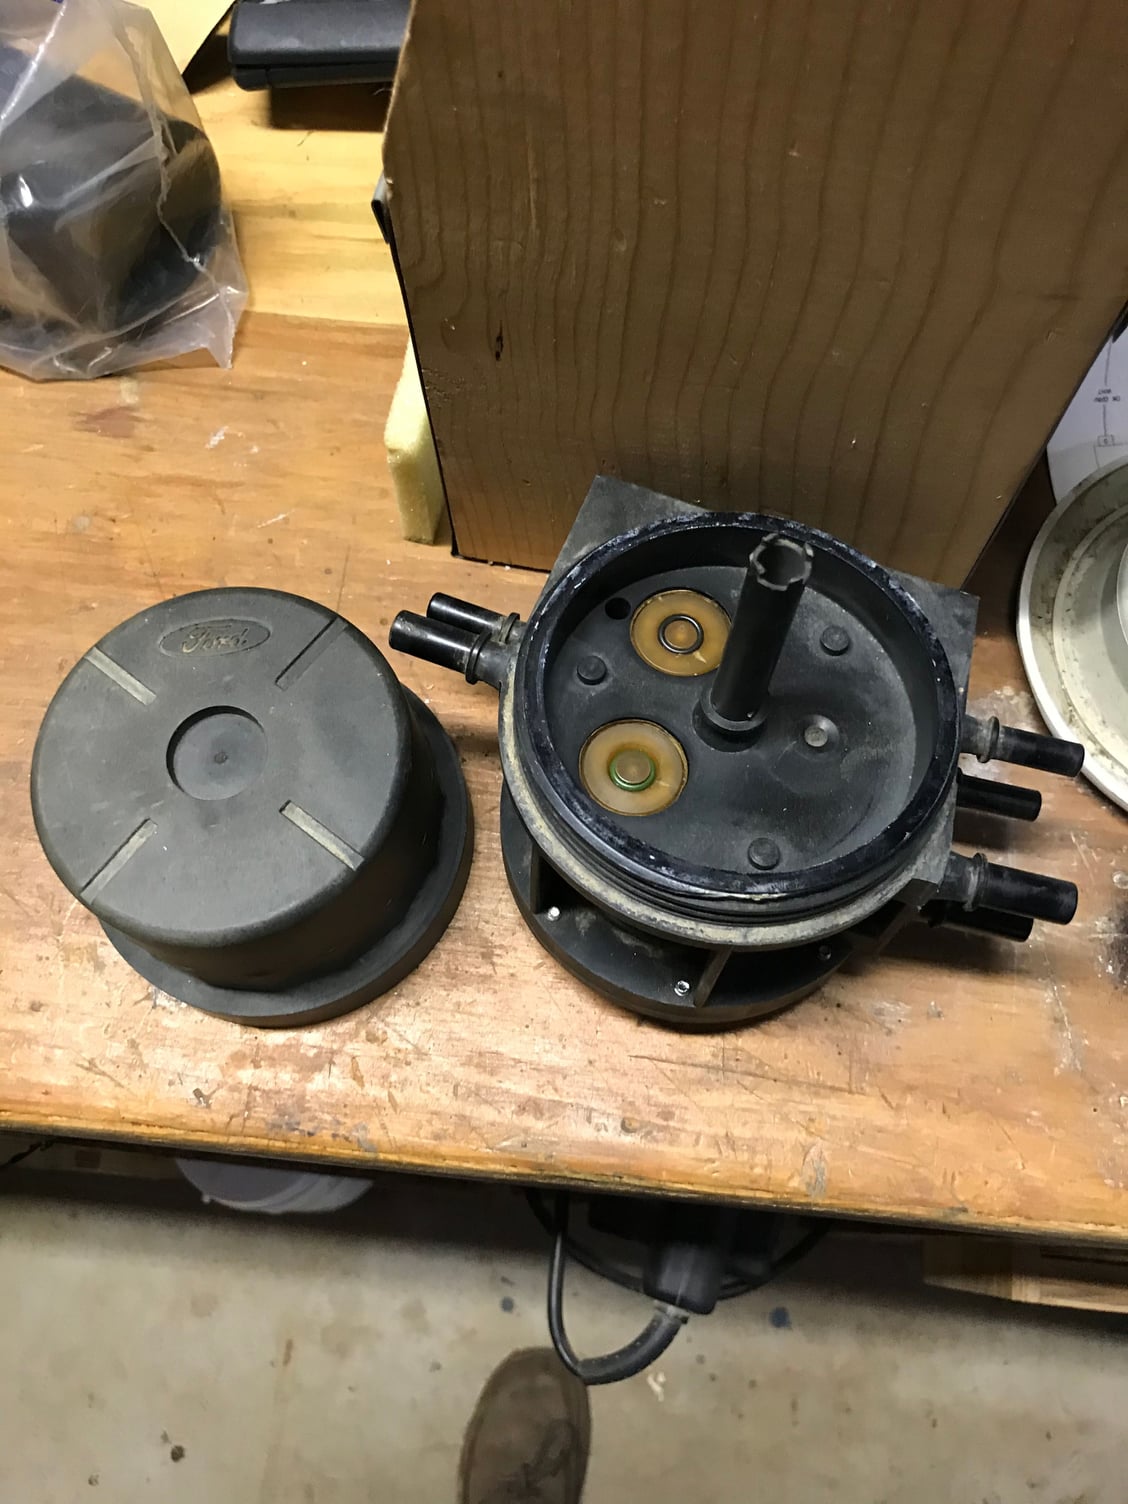 Replacement Fuel Selector Resevior - Ford F150 Forum - Community of ...